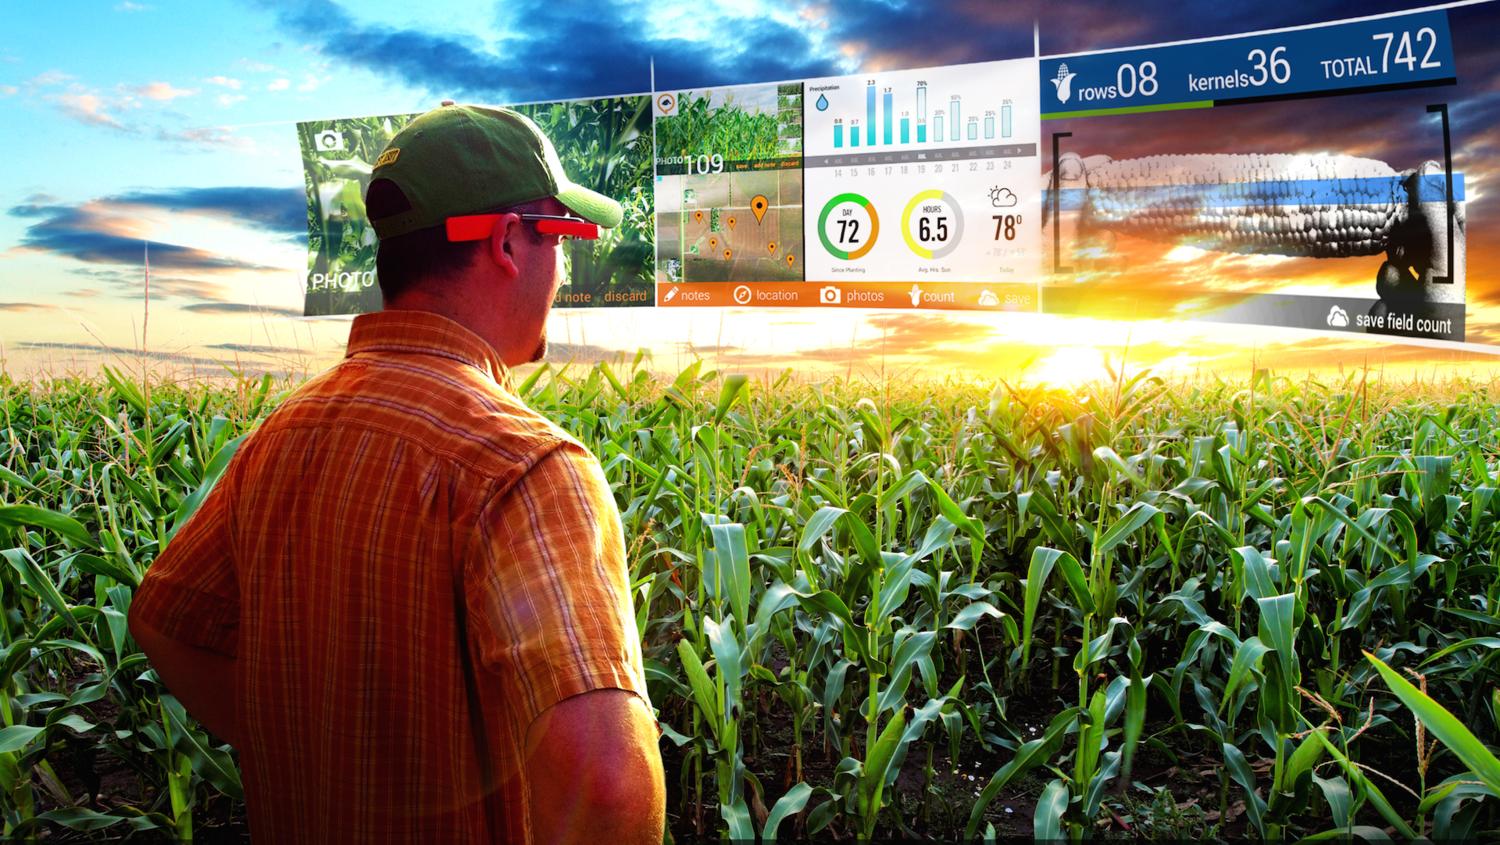 The Future of farming 4.0: drones and artificial intelligence